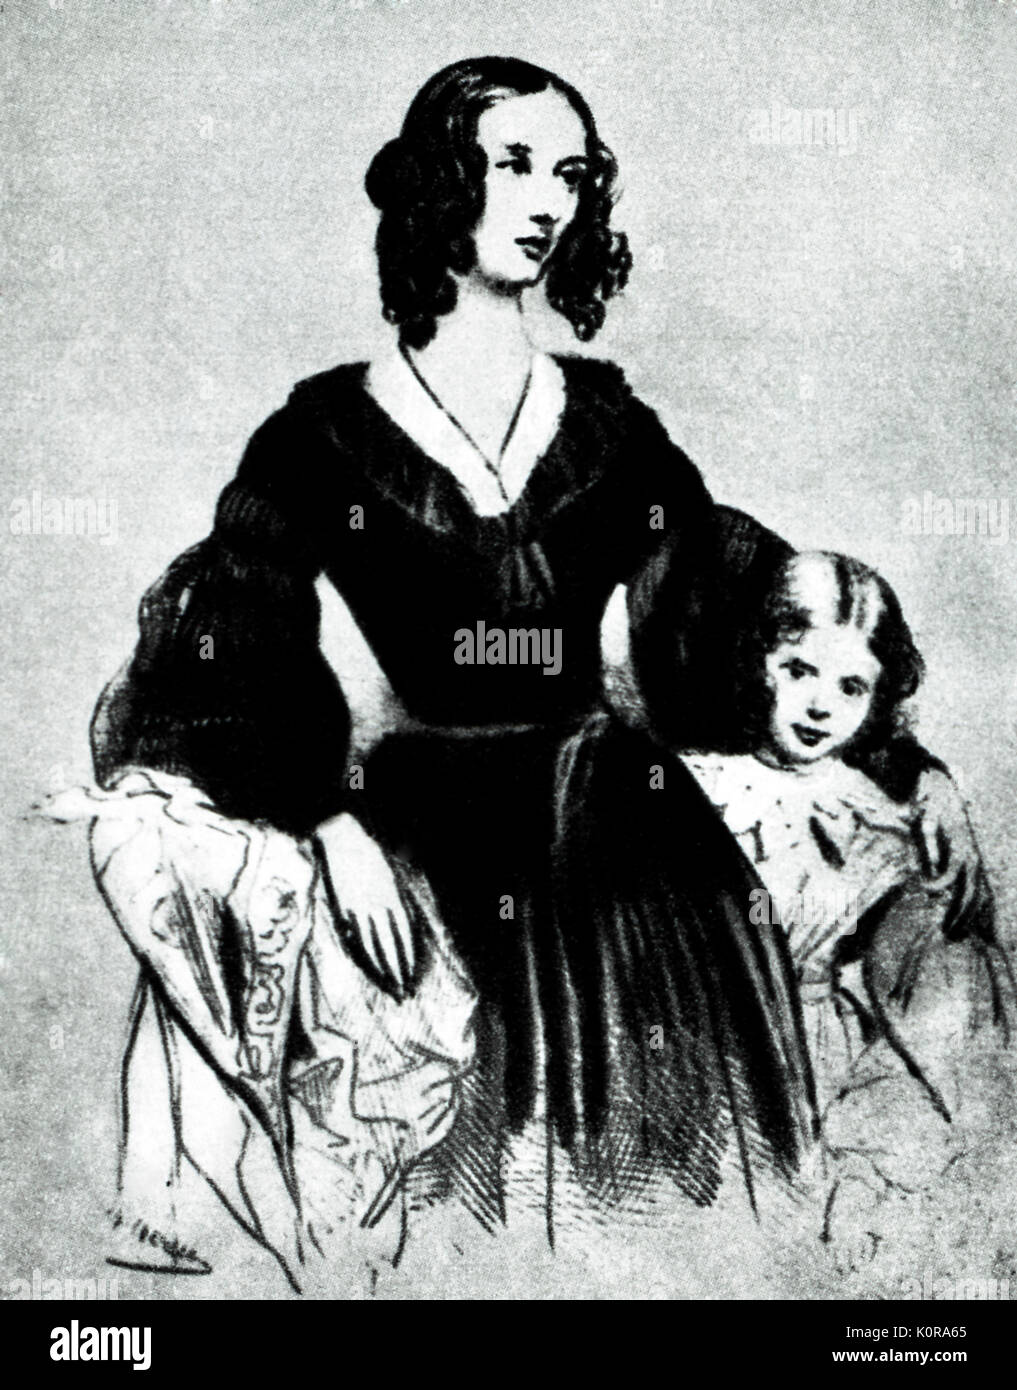 Portrait of Jane Stirling, by Archille Deveria. JS: b. 1804 - d. 1859, student and friend of Frédéric Chopin. Stock Photo